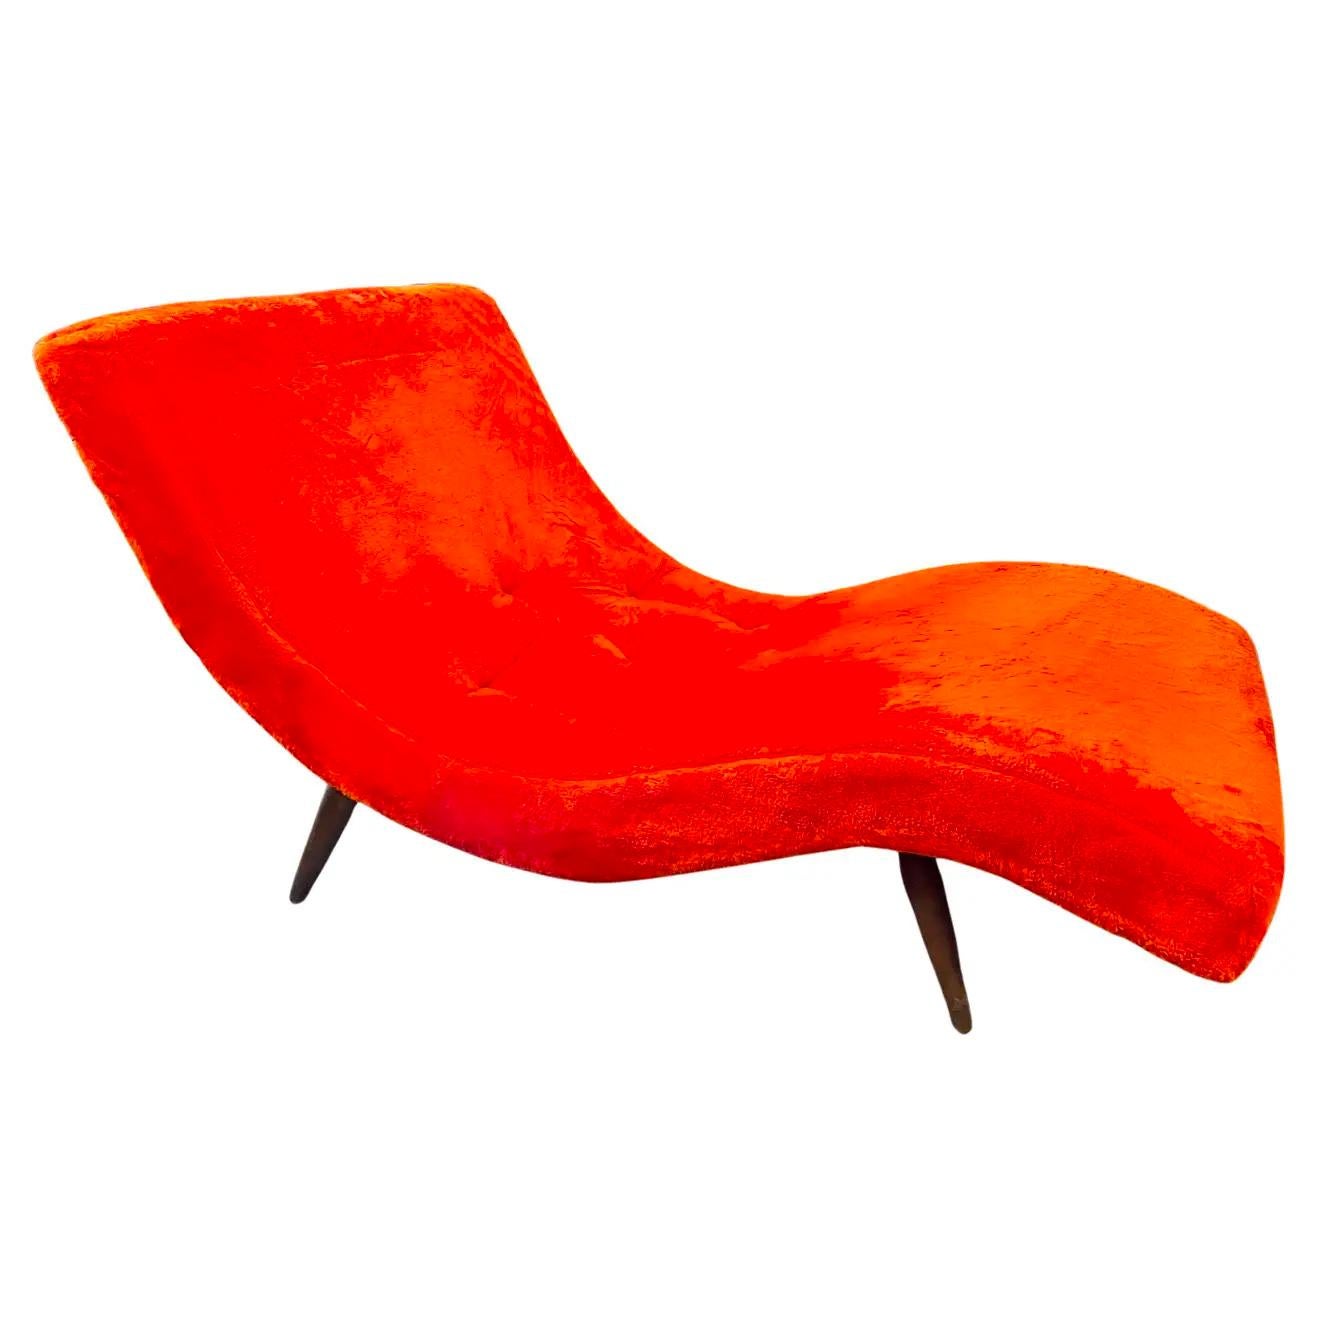 Hand-Crafted Adrian Pearsall for Craft Associates Orange Shag Wave Chaise Lounge Chair Mod